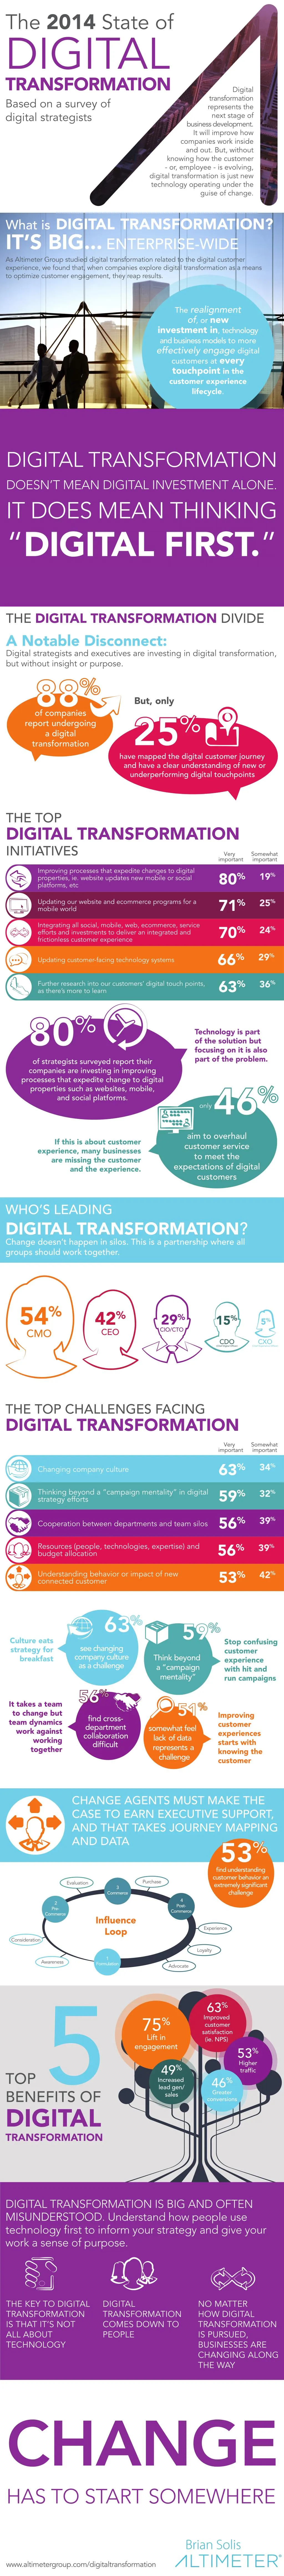 the 2014 state of digital transformation based